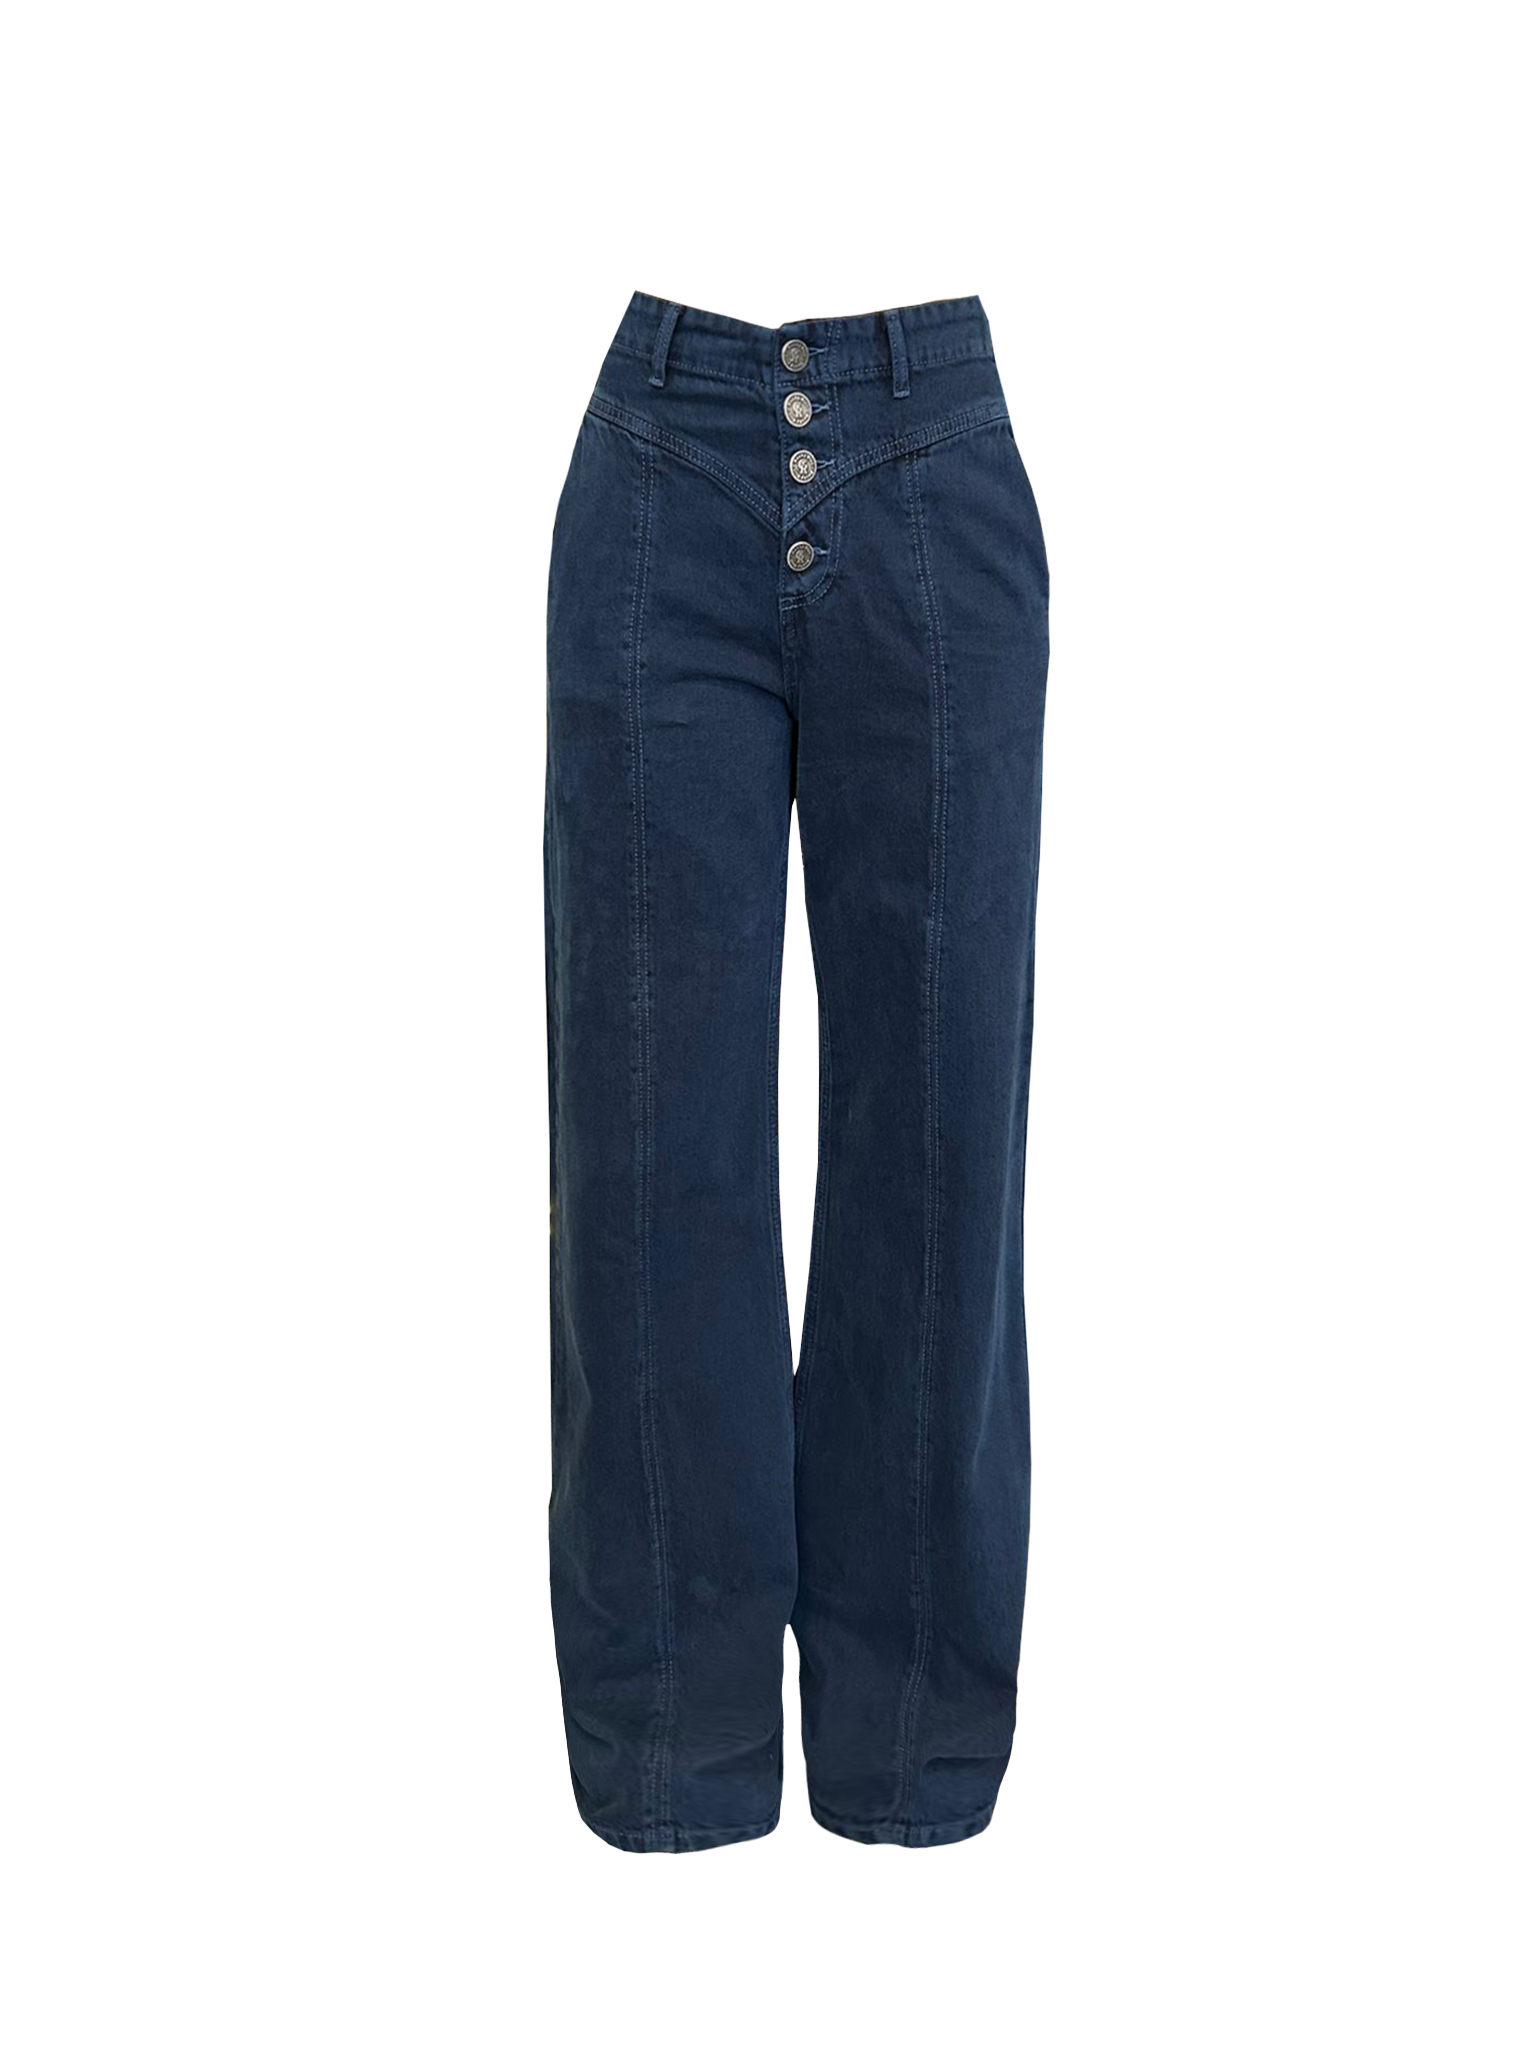 RG-209 Corsage detailed mid rise oversize navy blue jeans